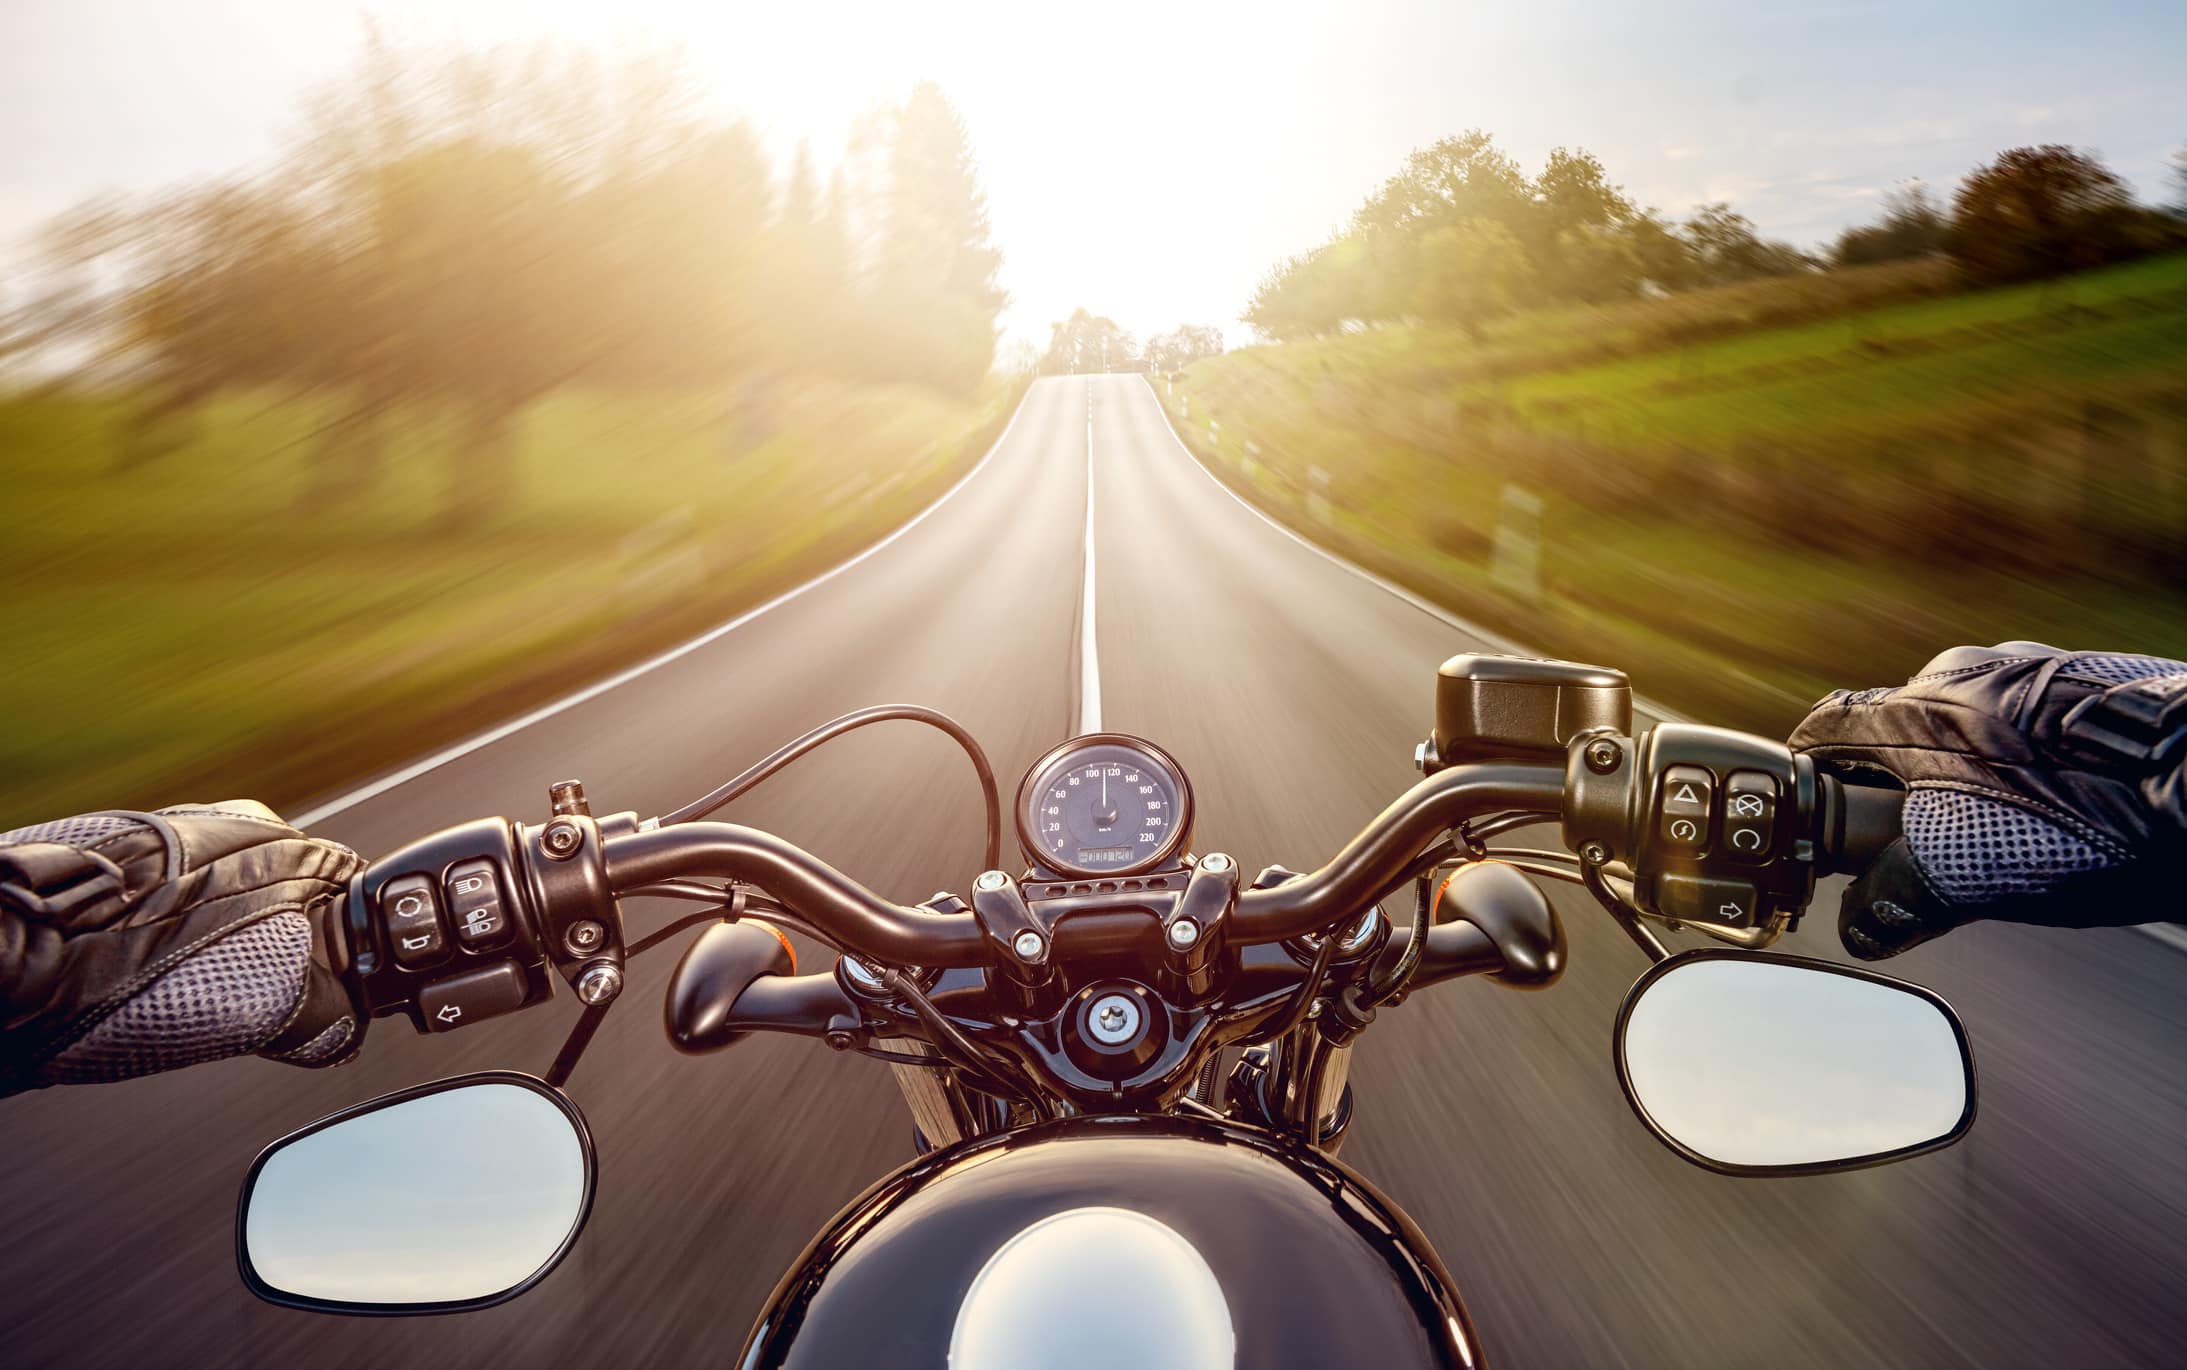 Best Motorcycle Routes in California